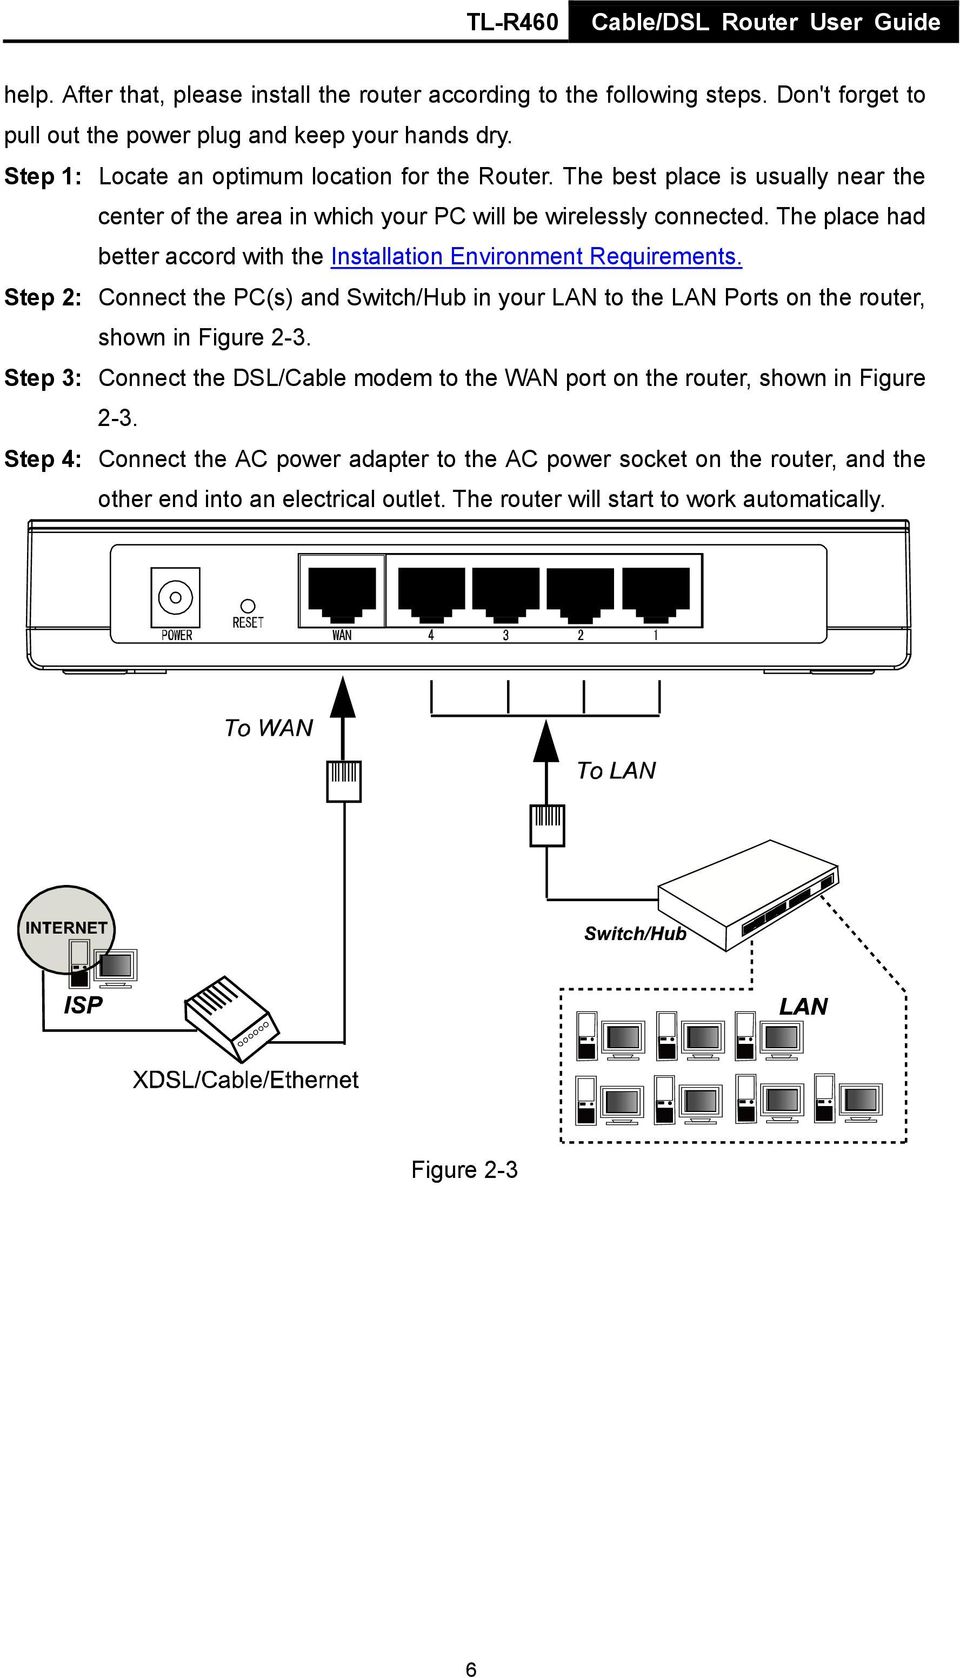 The place had better accord with the Installation Environment Requirements. Step 2: Connect the PC(s) and Switch/Hub in your LAN to the LAN Ports on the router, shown in Figure 2-3.